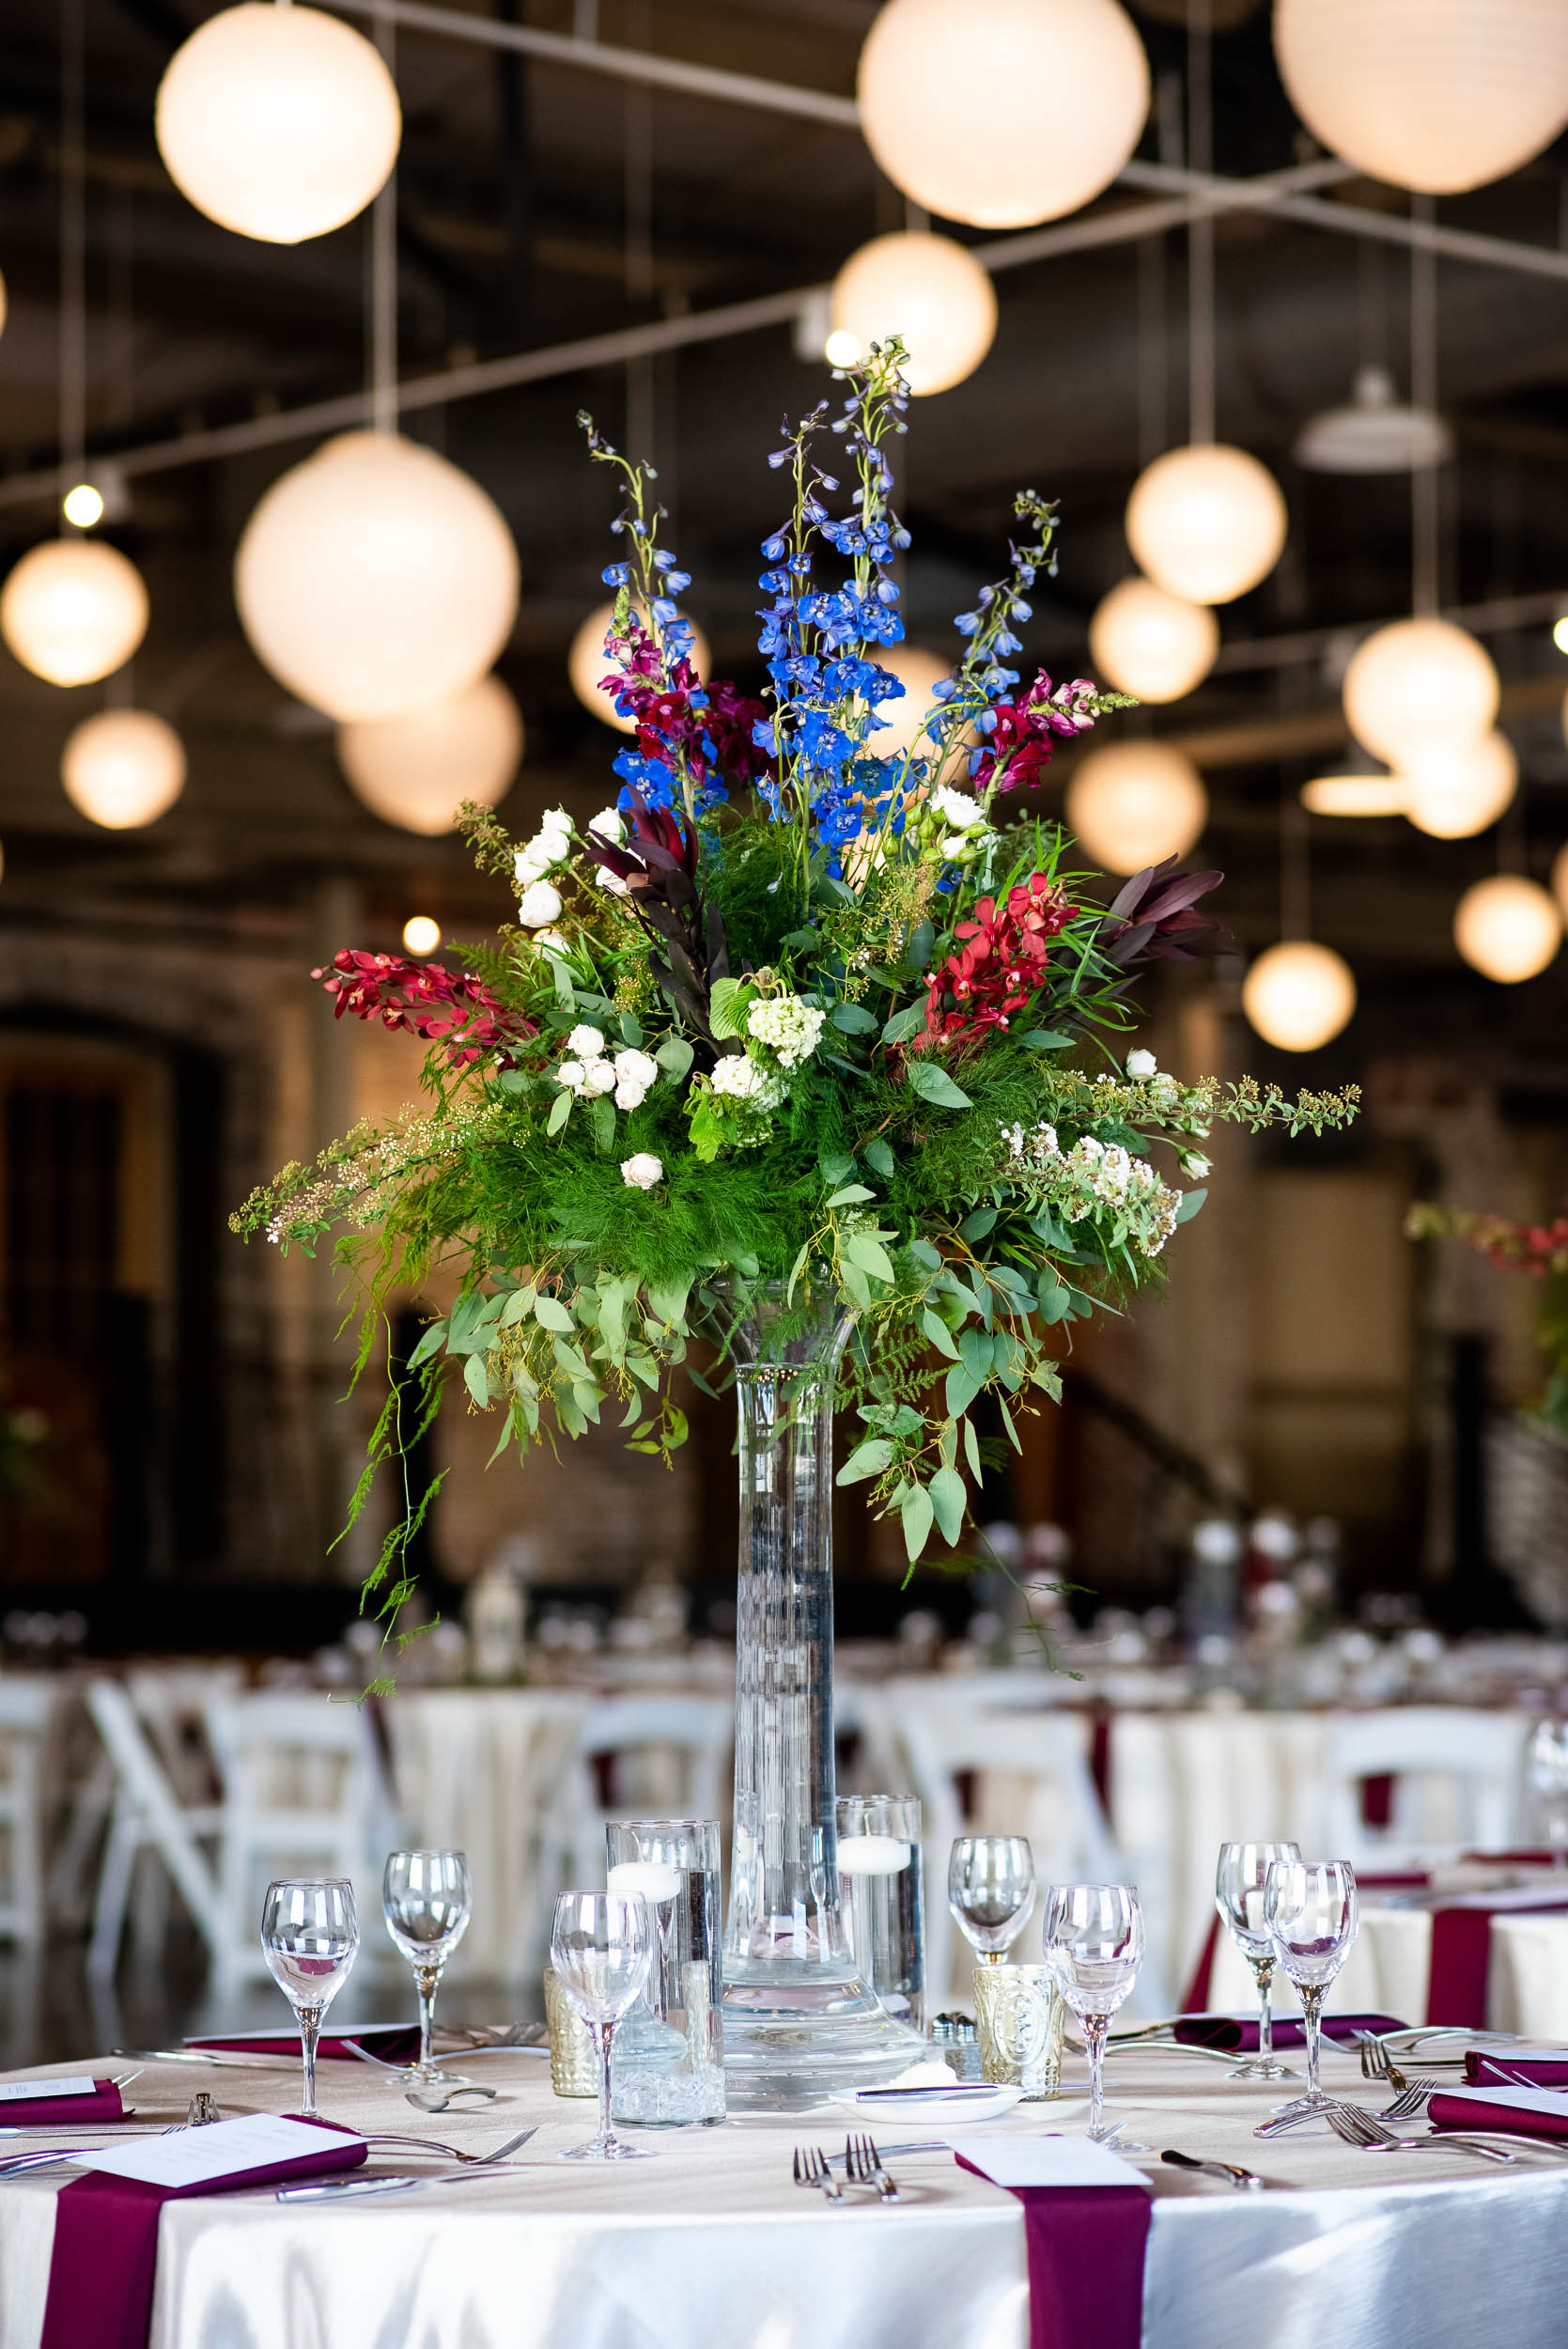 Tall wedding centerpieces: Modern industrial Chicago wedding inside Prairie Street Brewhouse captured by J. Brown Photography. Find more wedding ideas at jbrownphotography.com!